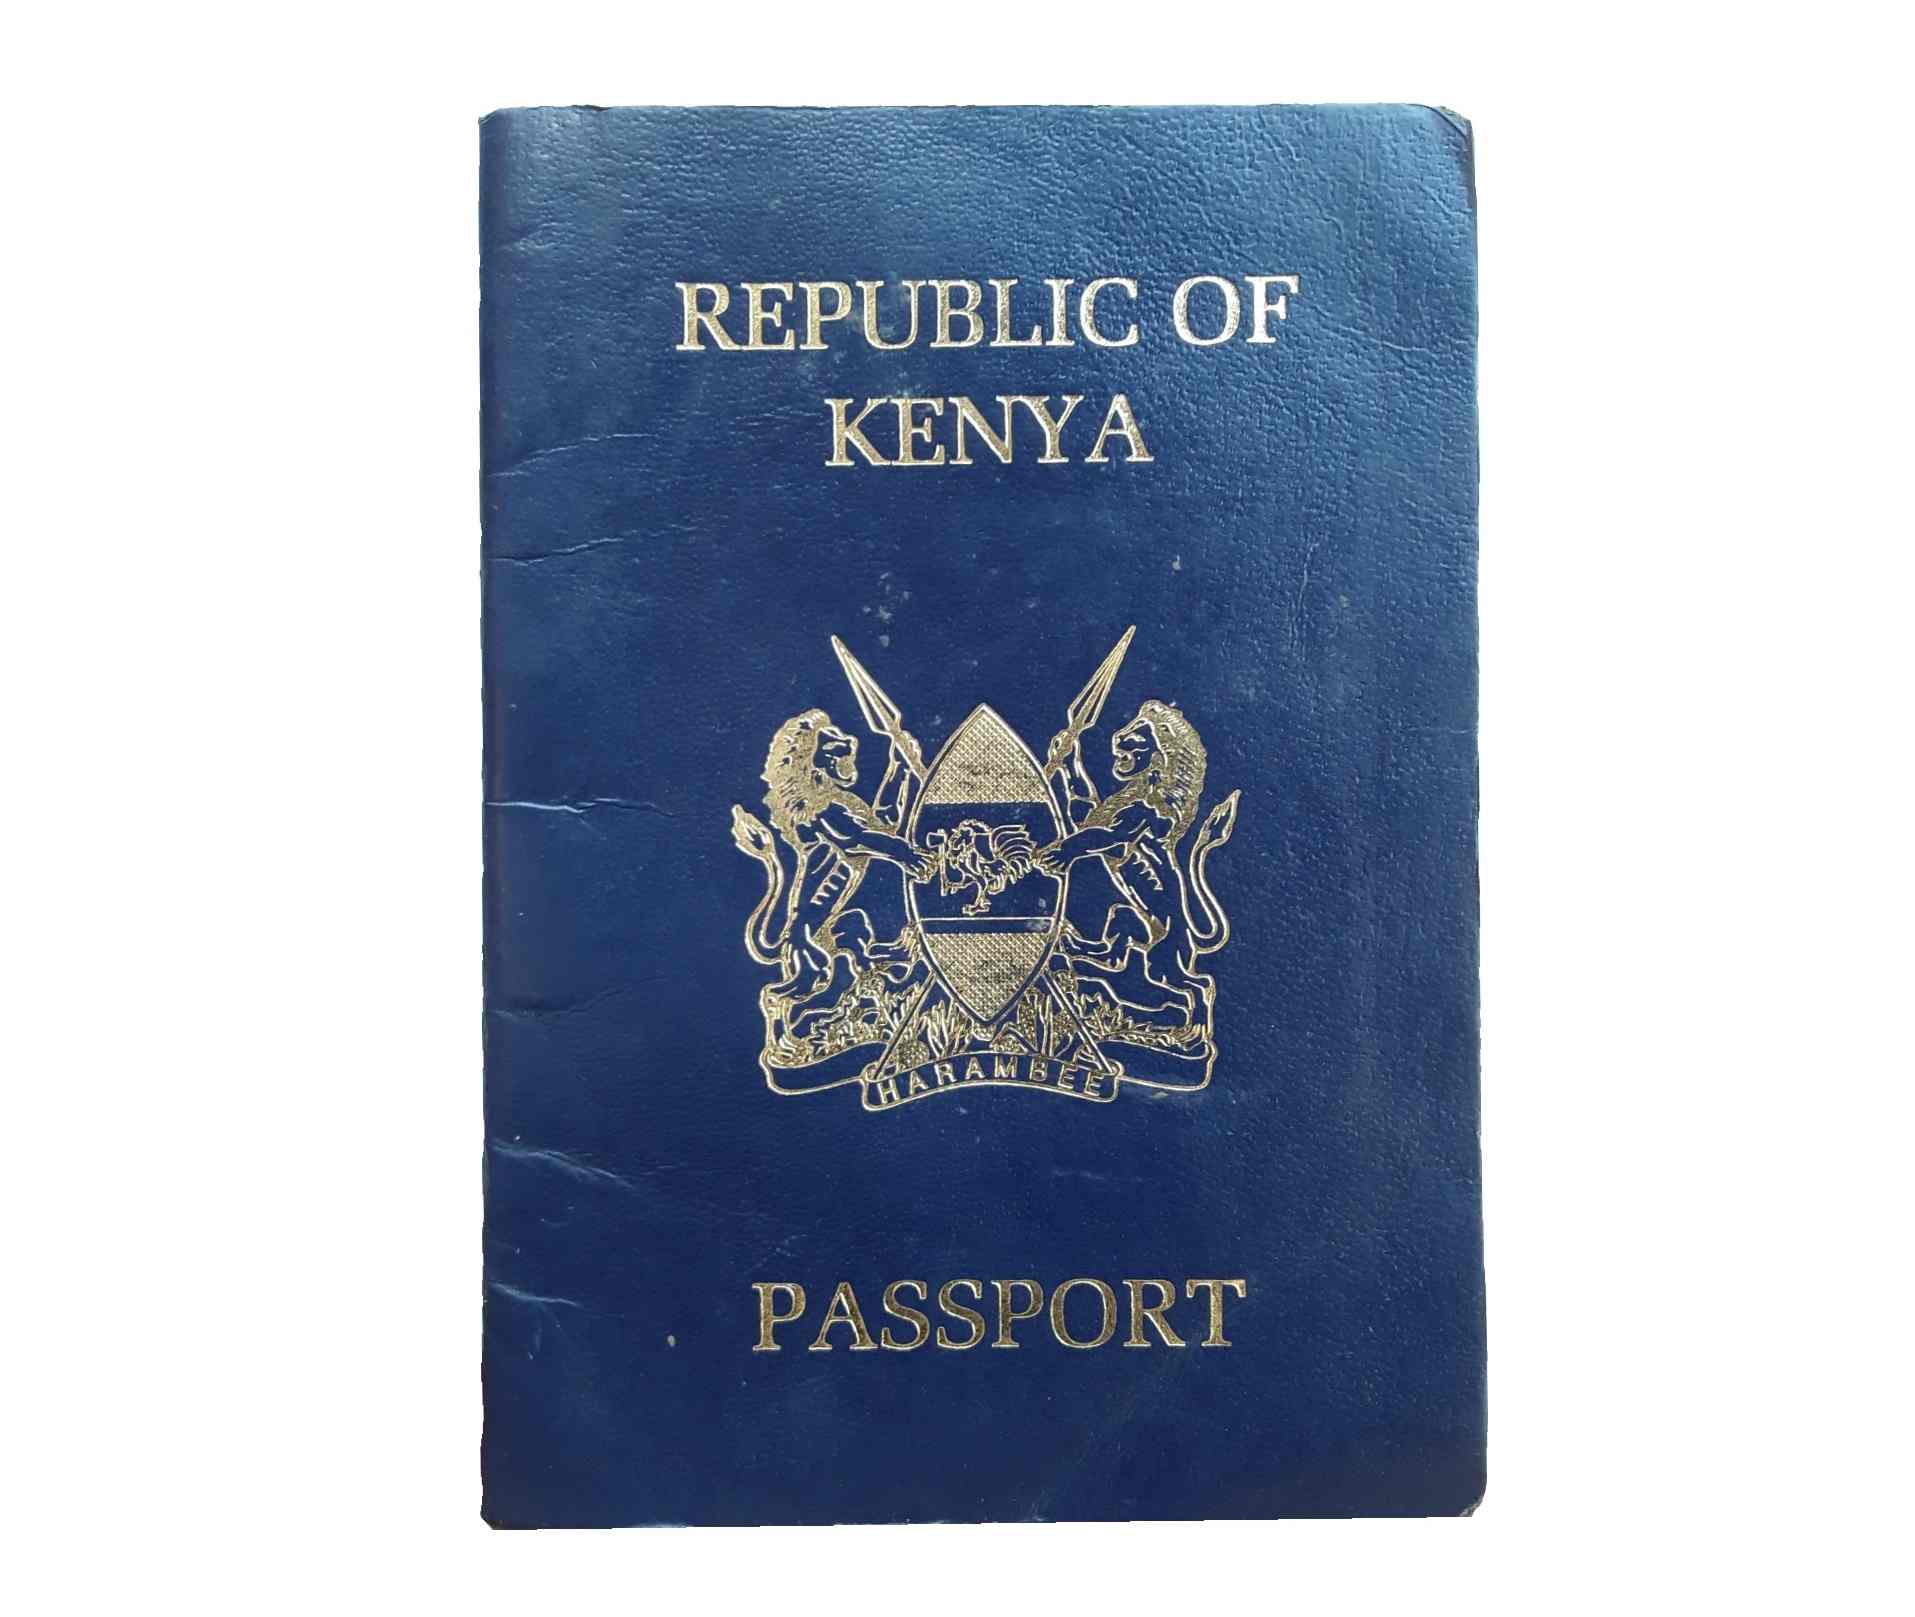 Full List of All Countries That Kenyans Can Travel to Visa Free or Get a Visa on Arrival